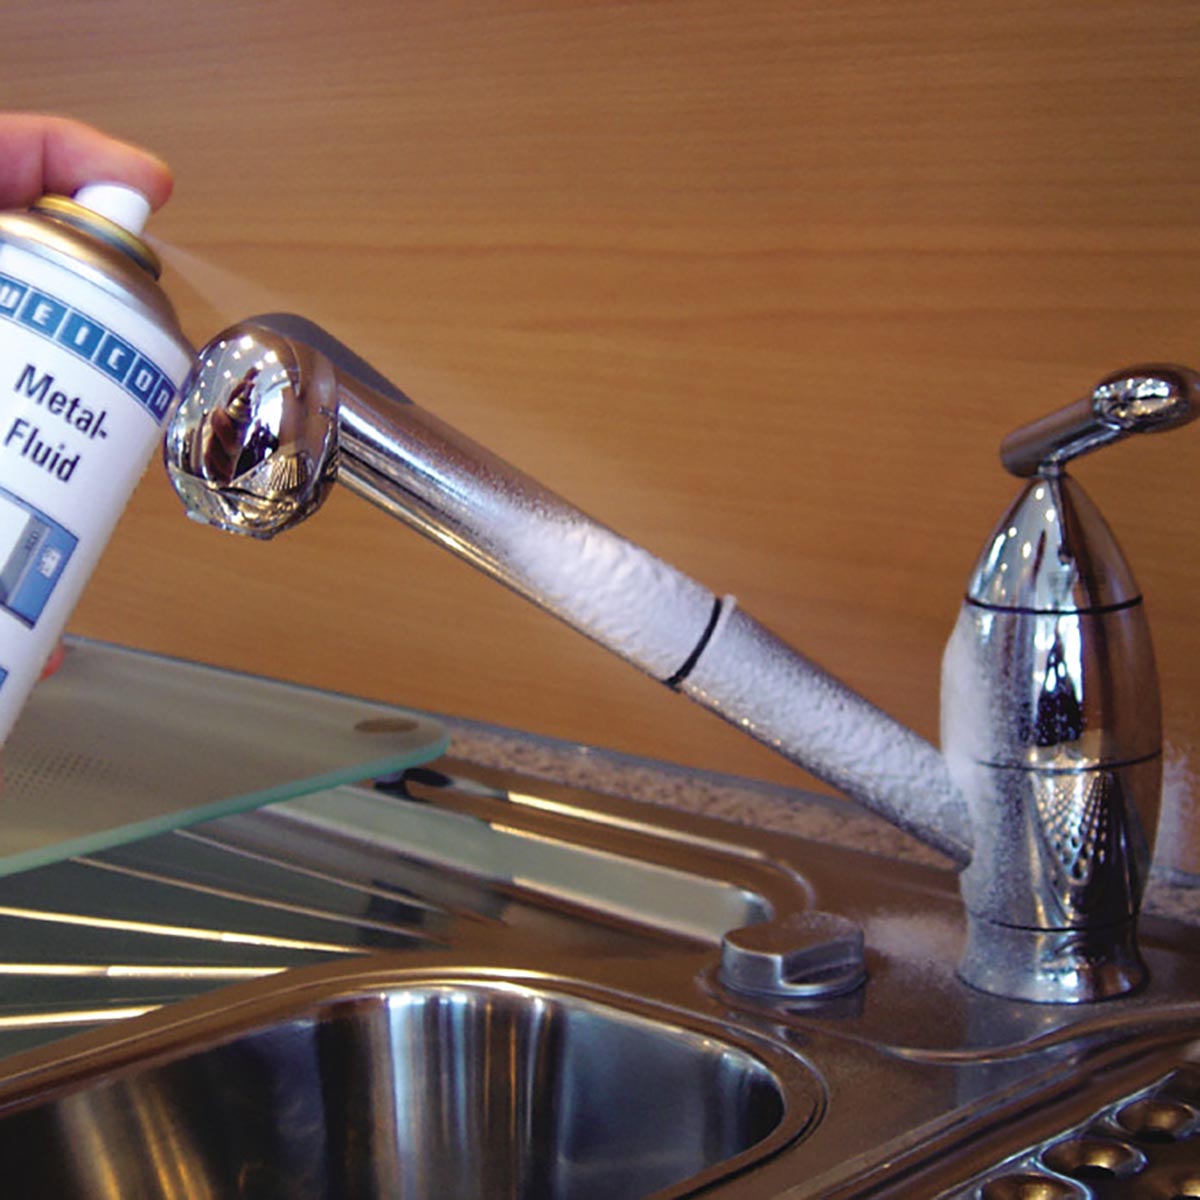 Weicon Metal Fluid Spray used to protect a stainless steel tap